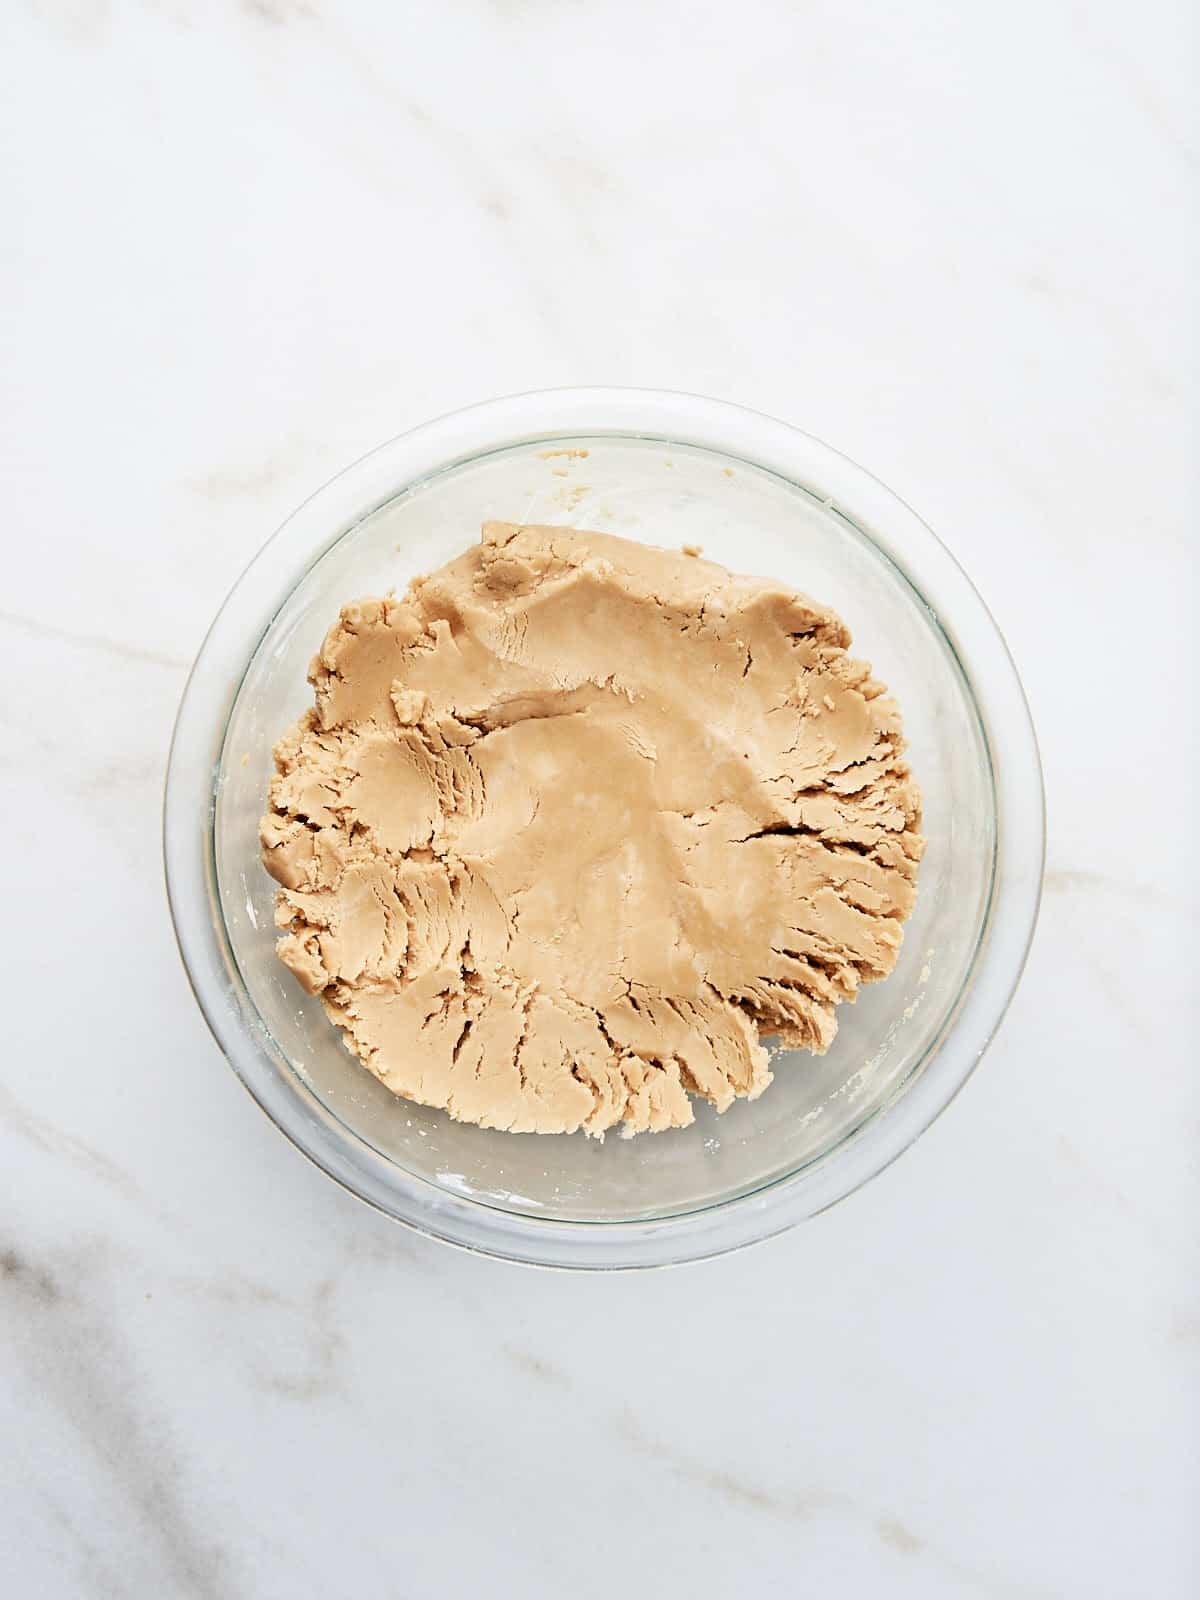 Peanut butter sugar dough in a glass bowl on white marble.